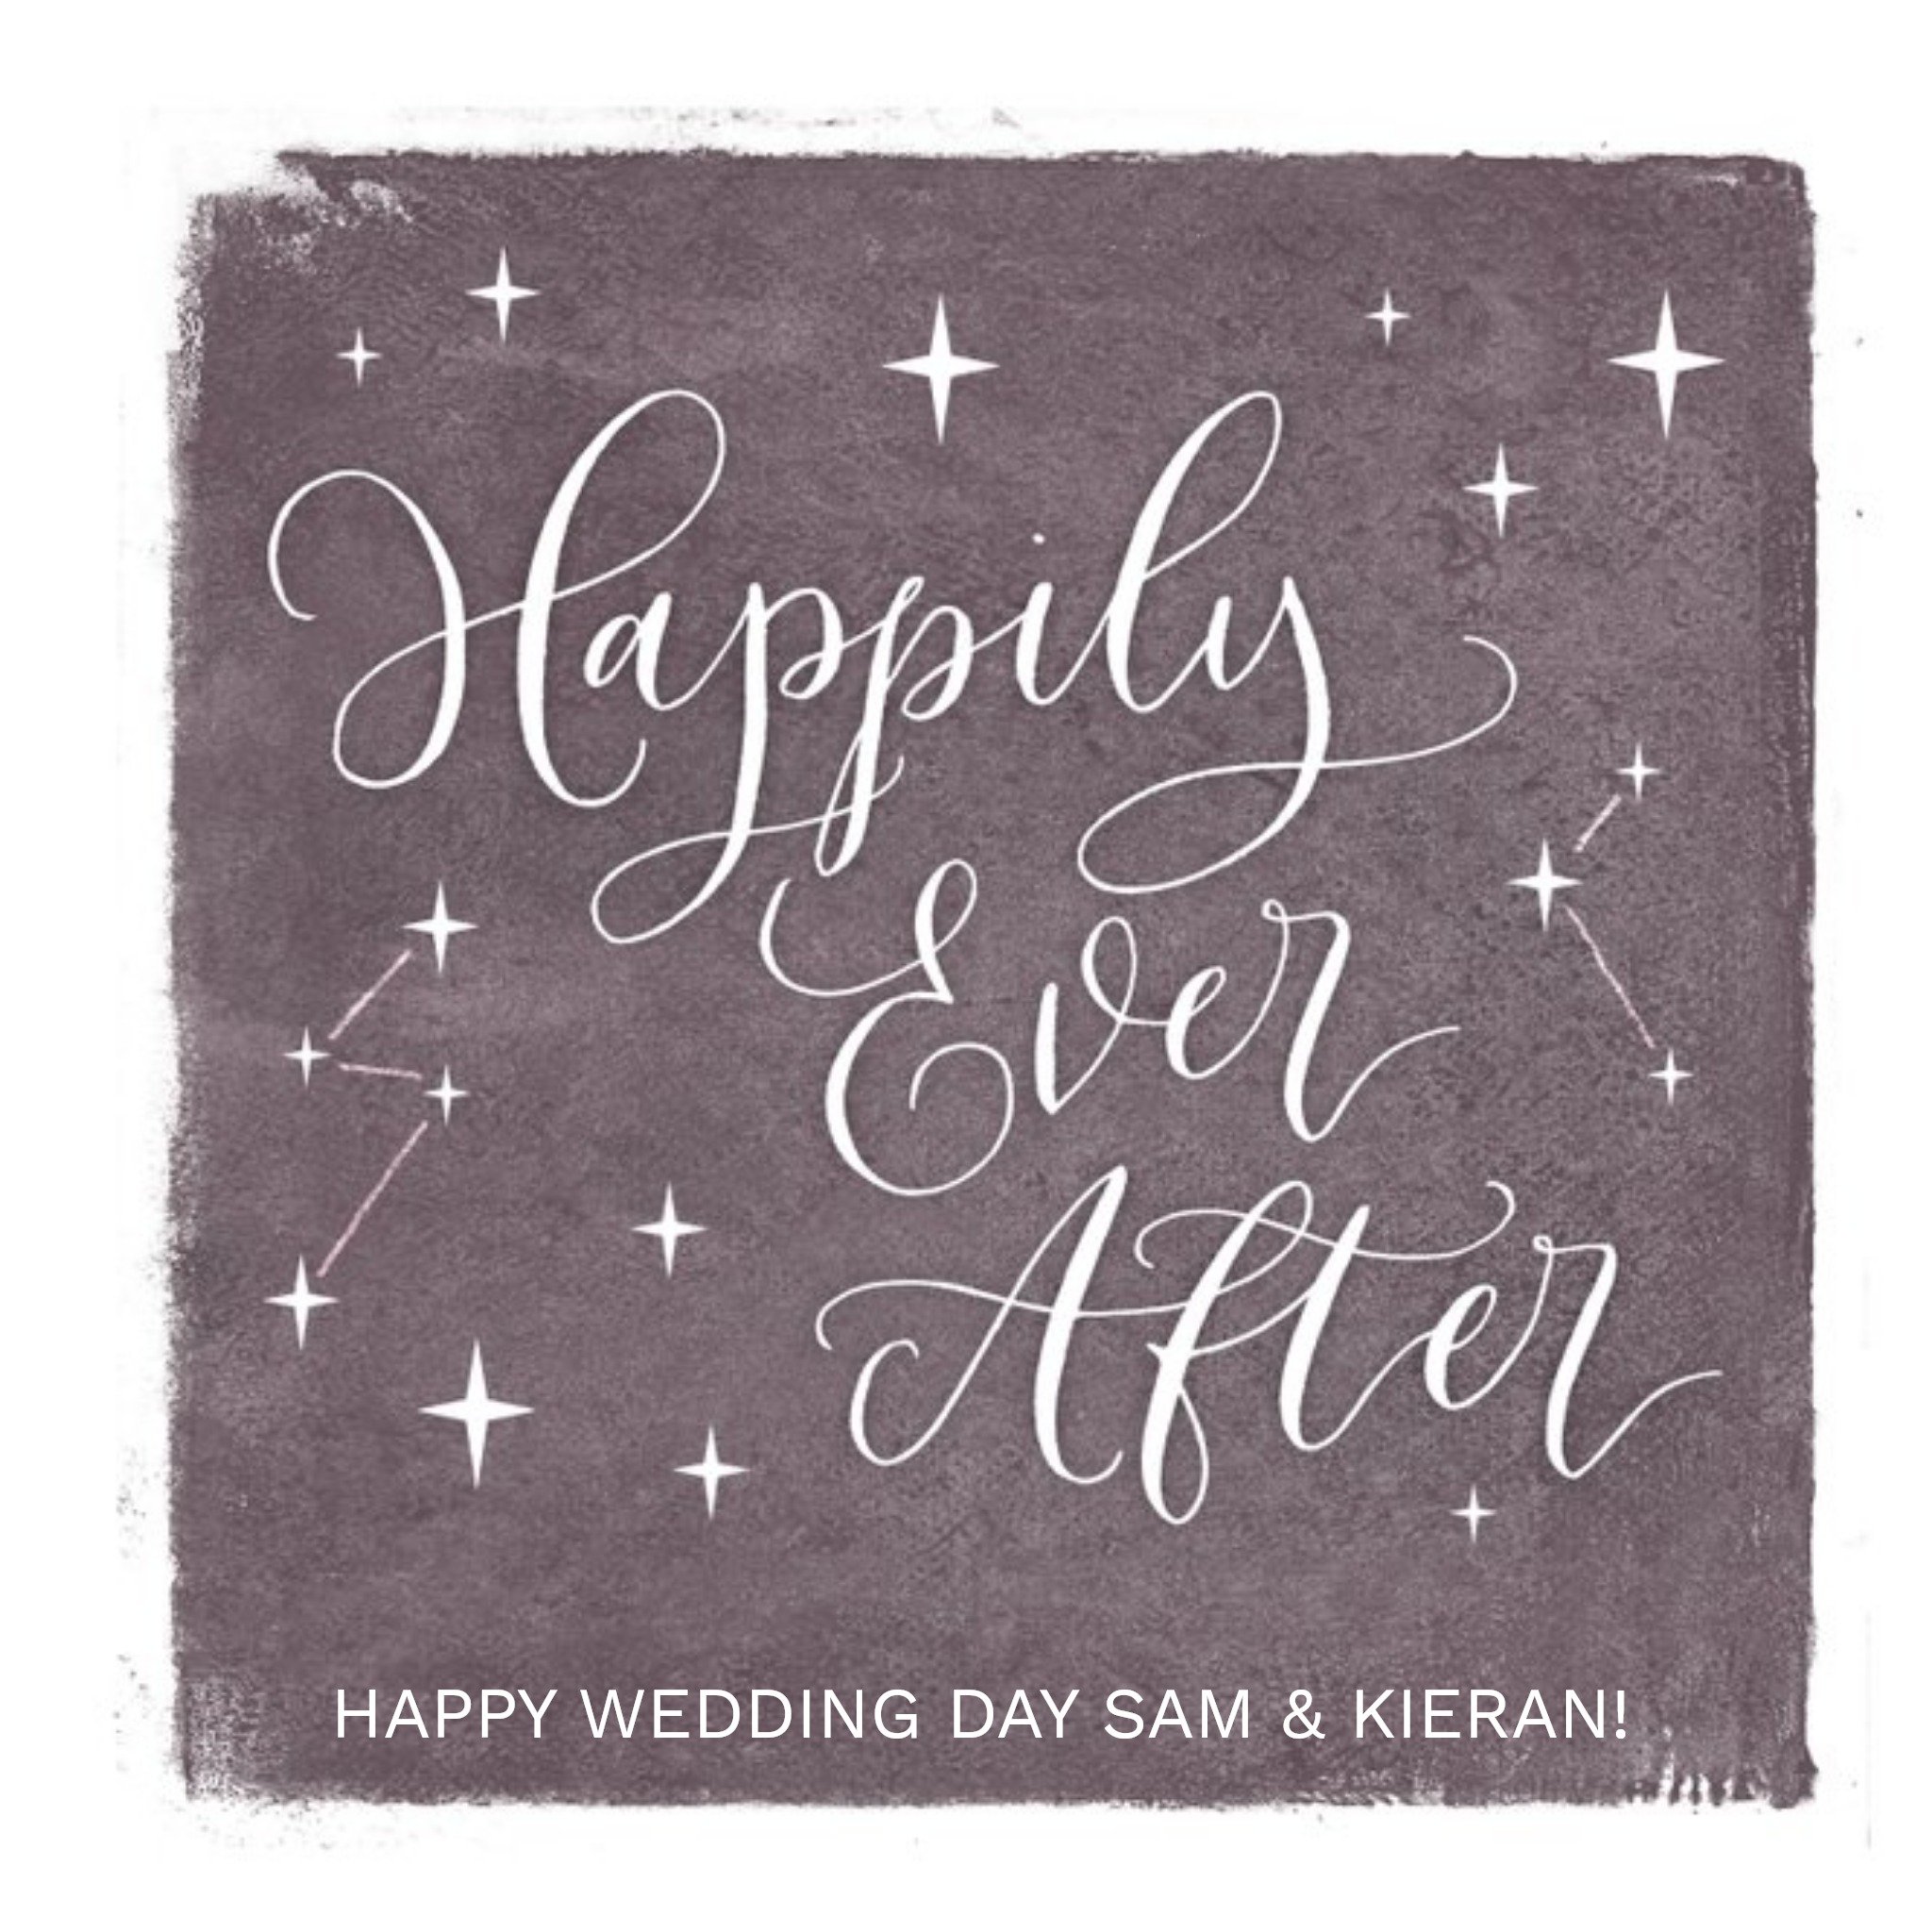 Moonpig Wedding Day Card - Happily Ever After, Square